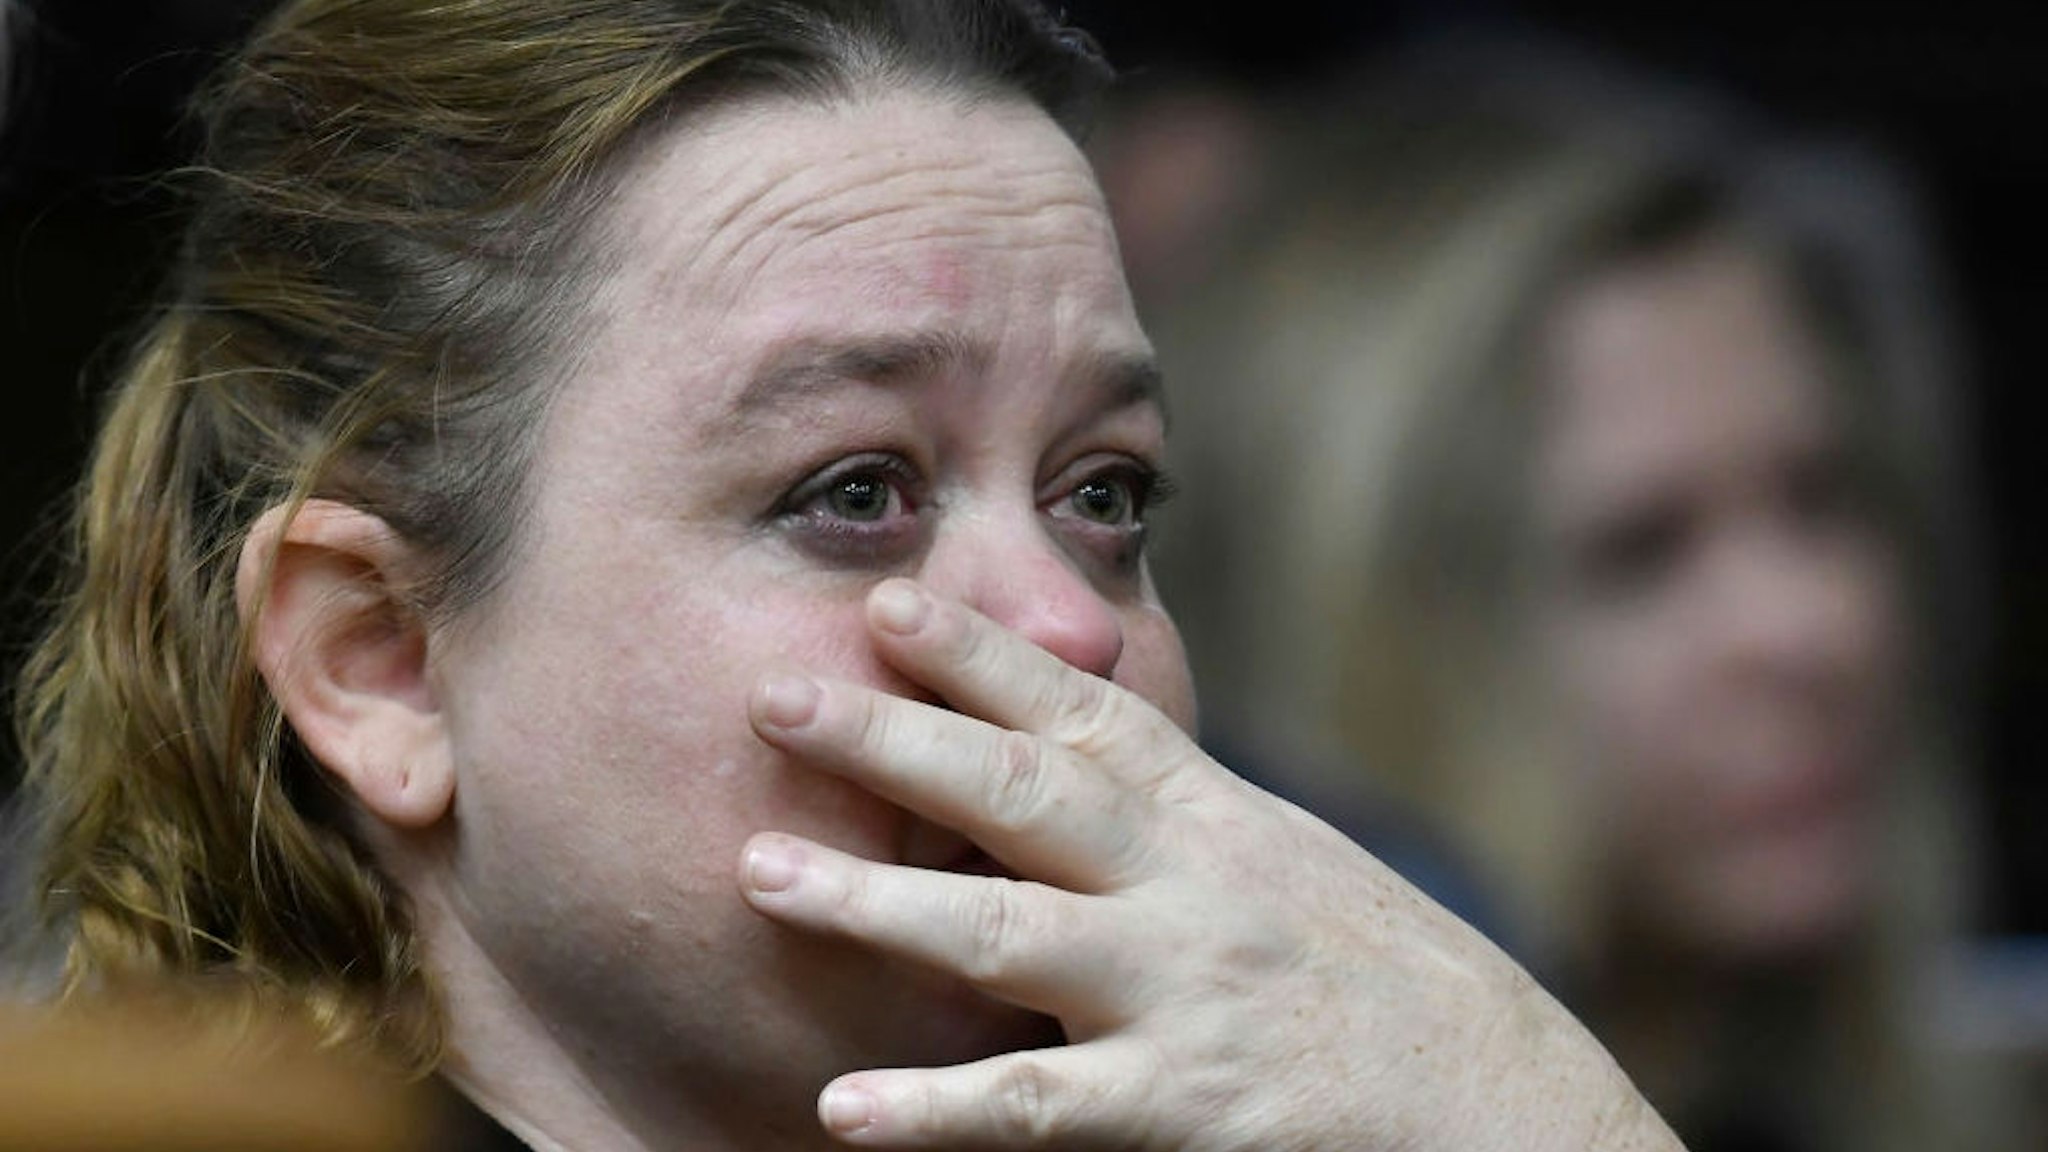 Wendy Rittenhouse, Kyle Rittenhouse's mother, gets emotional as her son is cross-examined by Assistant District Attorney Thomas Binger during the trial at the Kenosha County Courthouse on November 10, 2021 in Kenosha, Wisconsin.